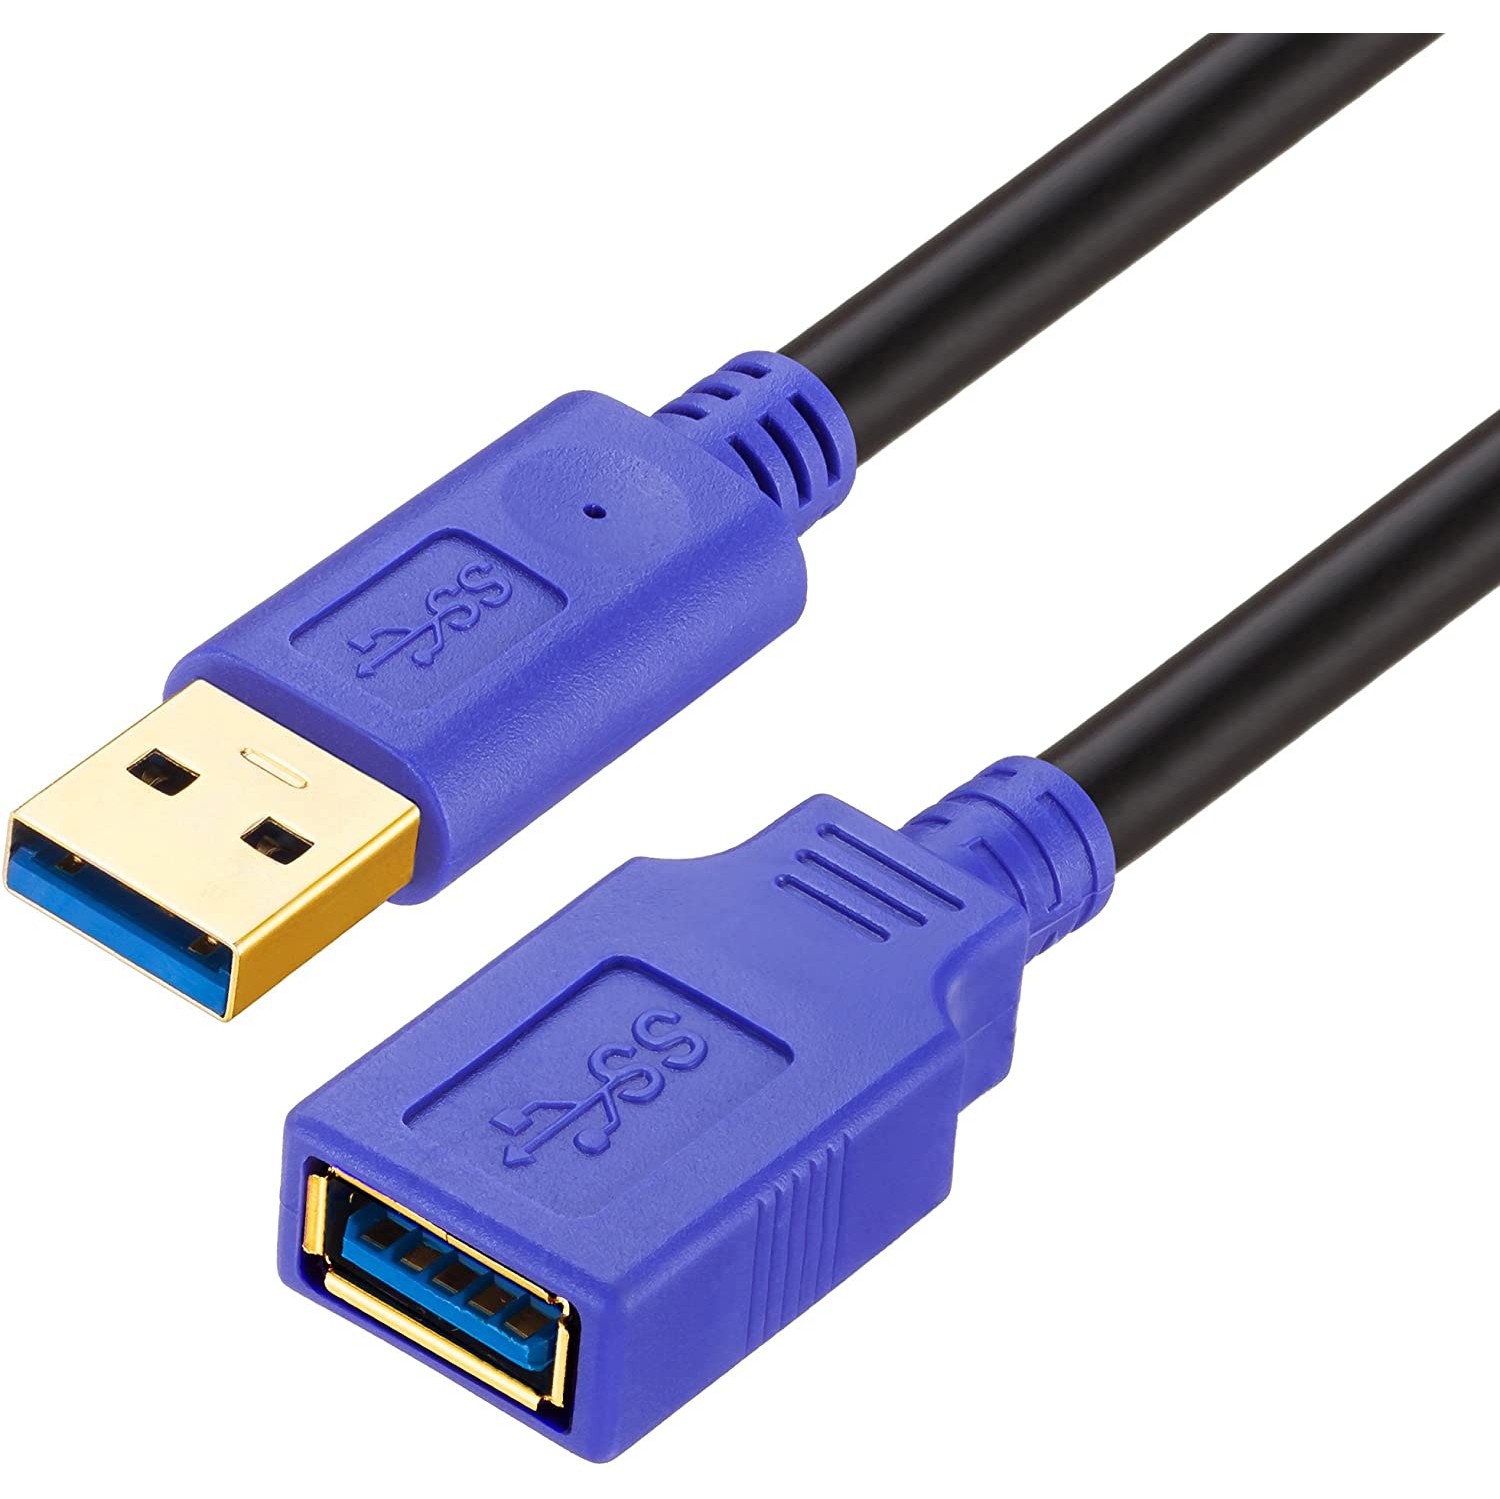 USB Extension Cable USB 3.0 Extender Cord Type A Male to Female Data Transfer Lead for Playstation, Xbox, Oculus VR, USB Flash Drive, Card Reader, Hard Drive, Keyboard, Printer, Ca